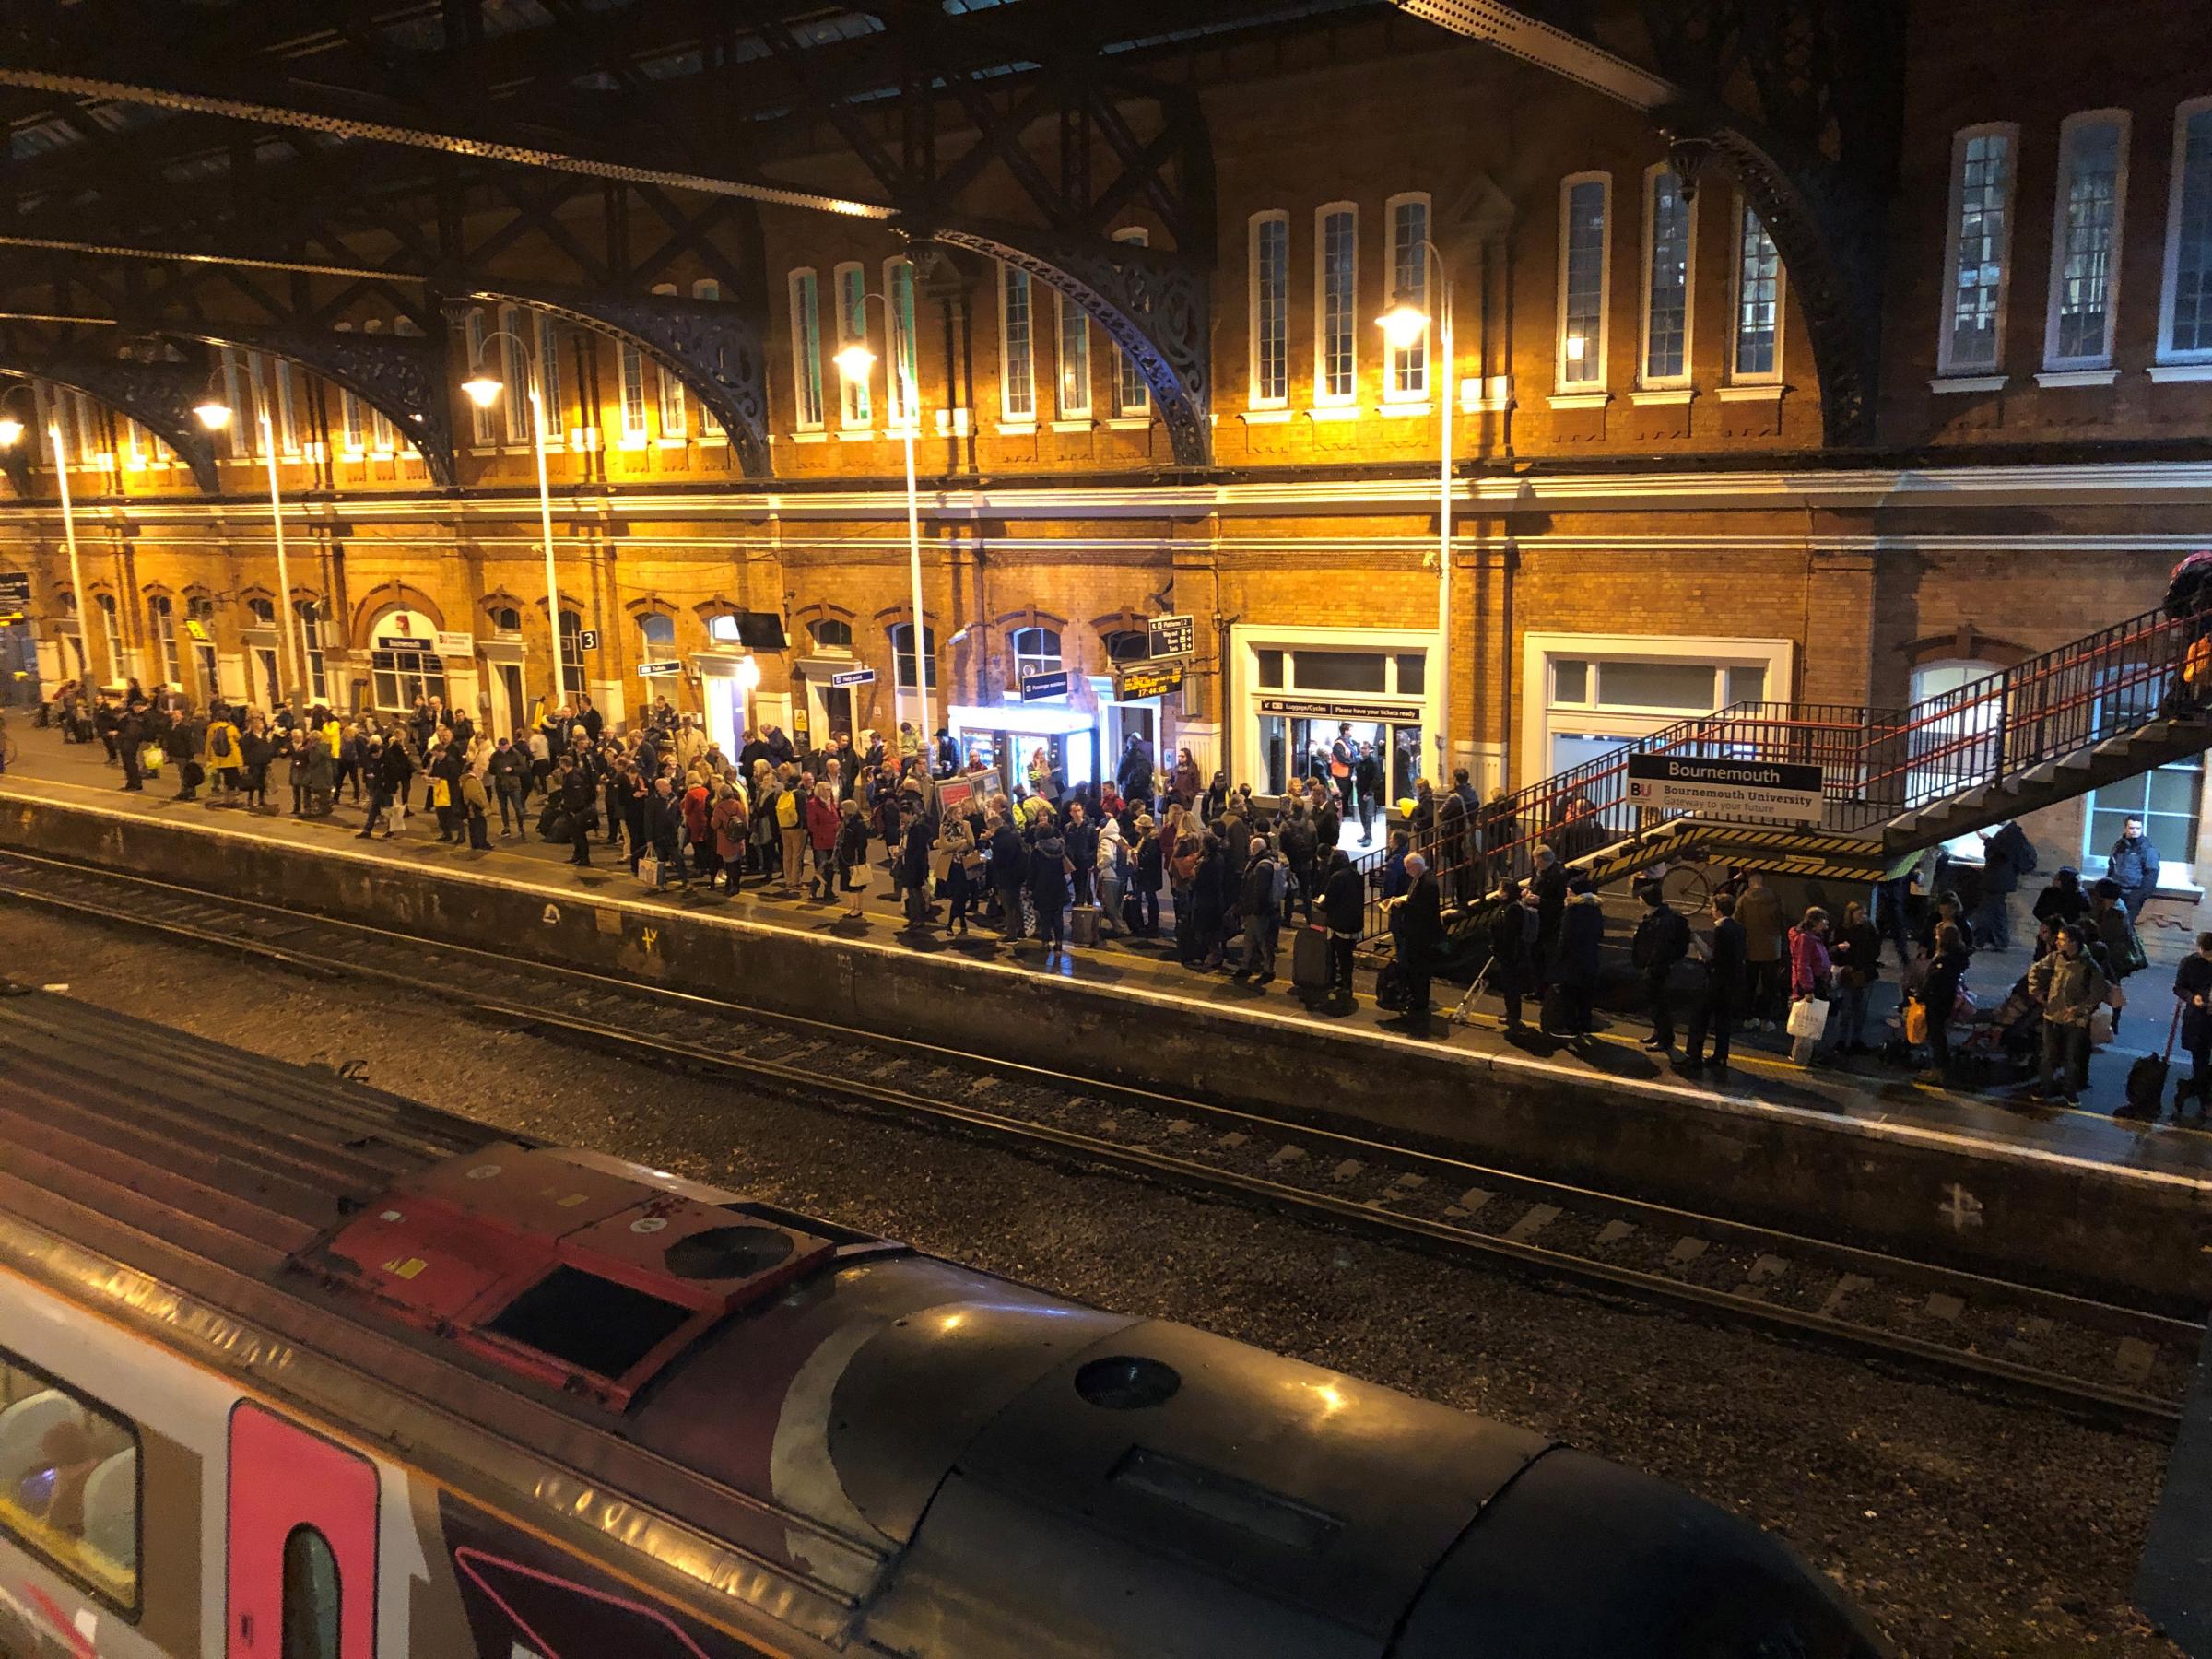 More delays on the trains between Bournemouth and Weymouth